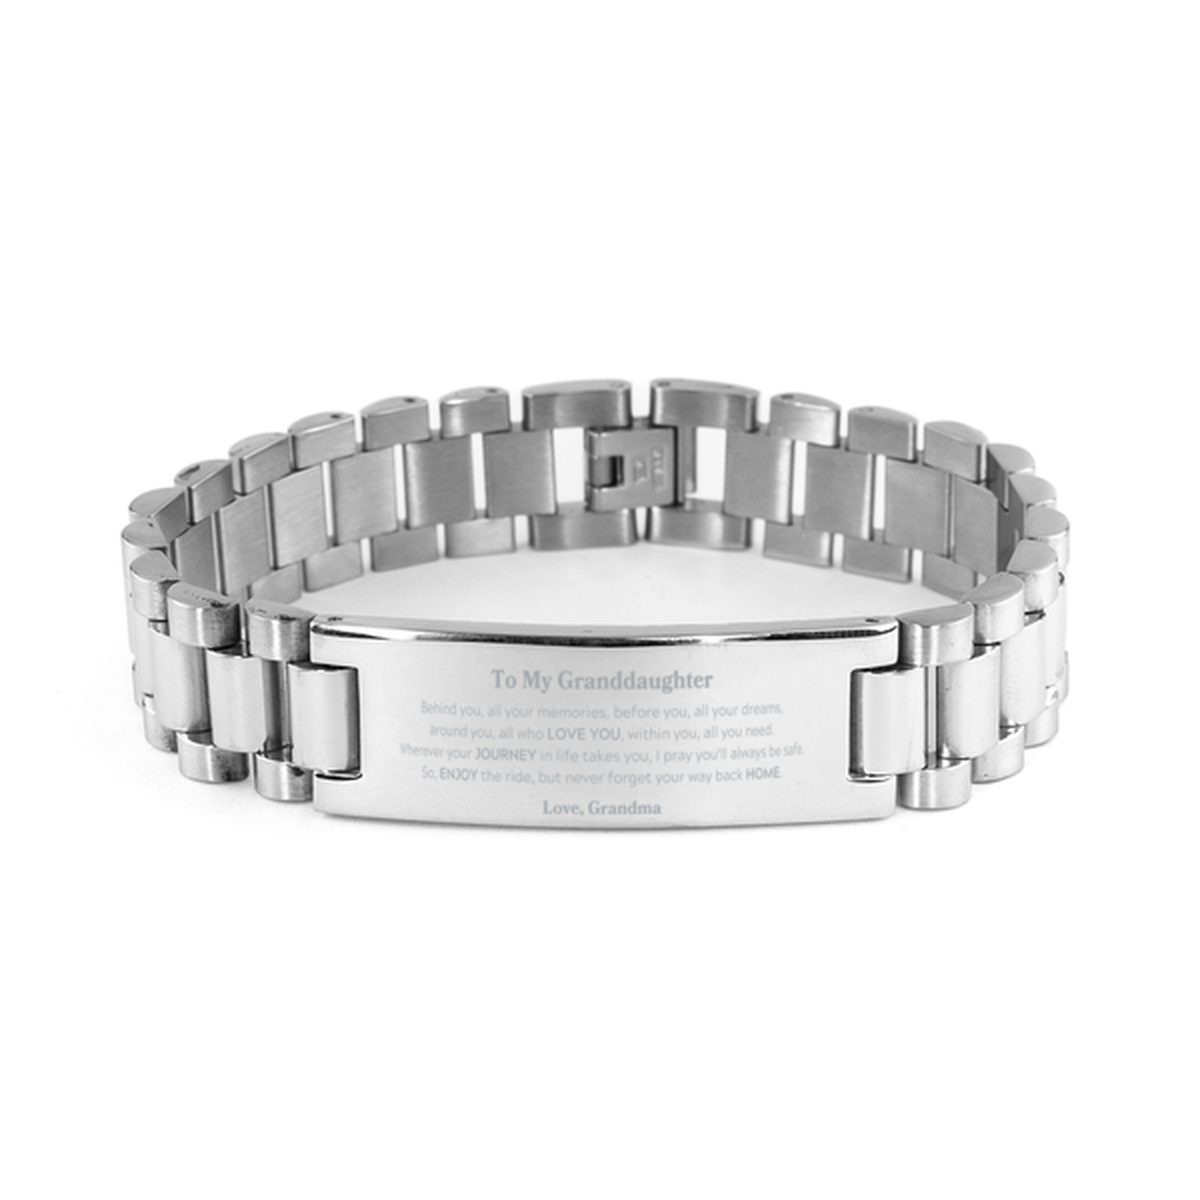 To My Granddaughter Graduation Gifts from Grandma, Granddaughter Ladder Stainless Steel Bracelet Christmas Birthday Gifts for Granddaughter Behind you, all your memories, before you, all your dreams. Love, Grandma